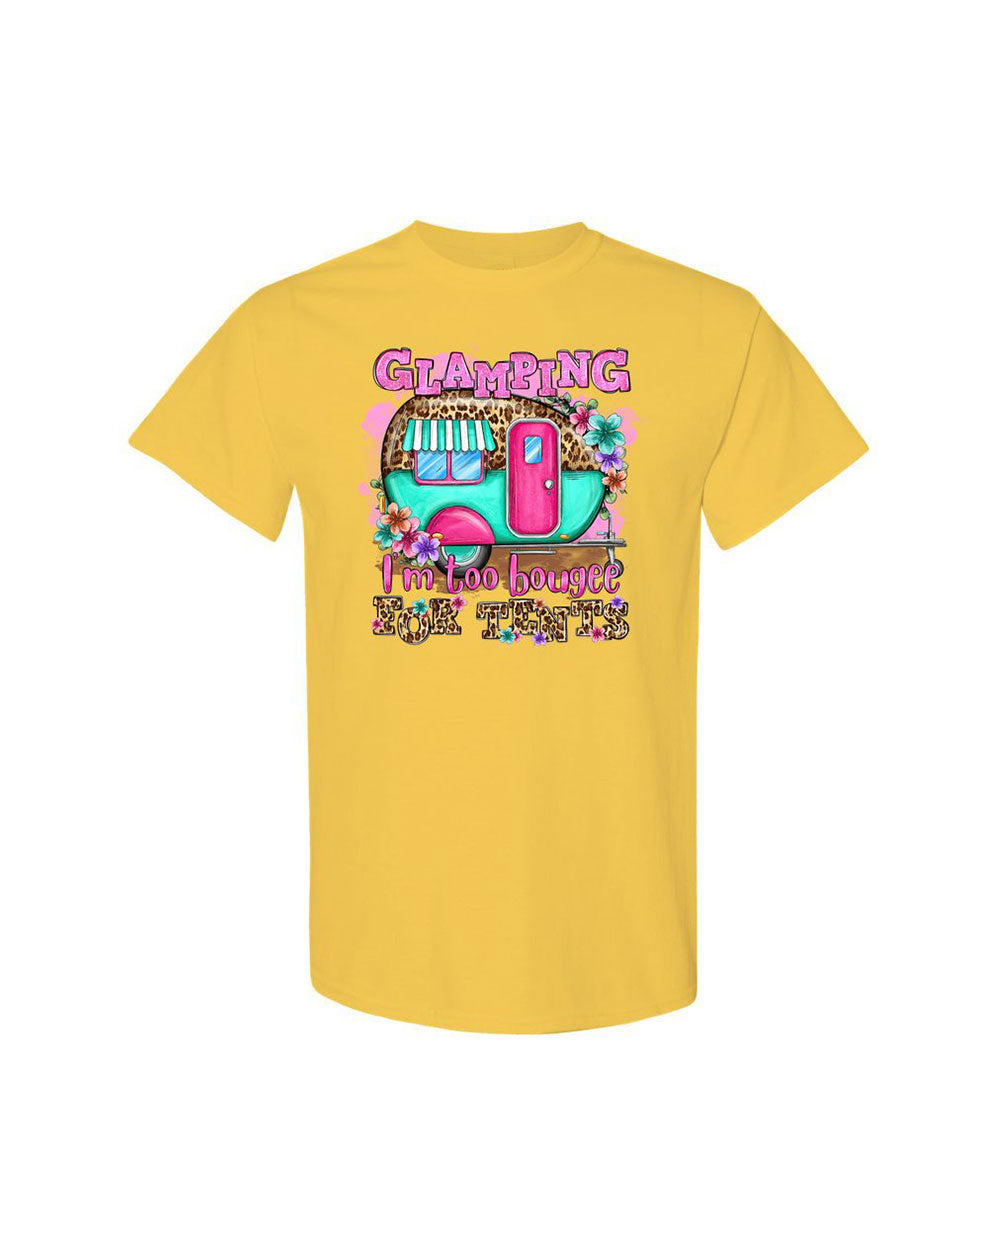 GLAMPING I'M TO BOUGEE COTTON SHIRT - TLTR1906238